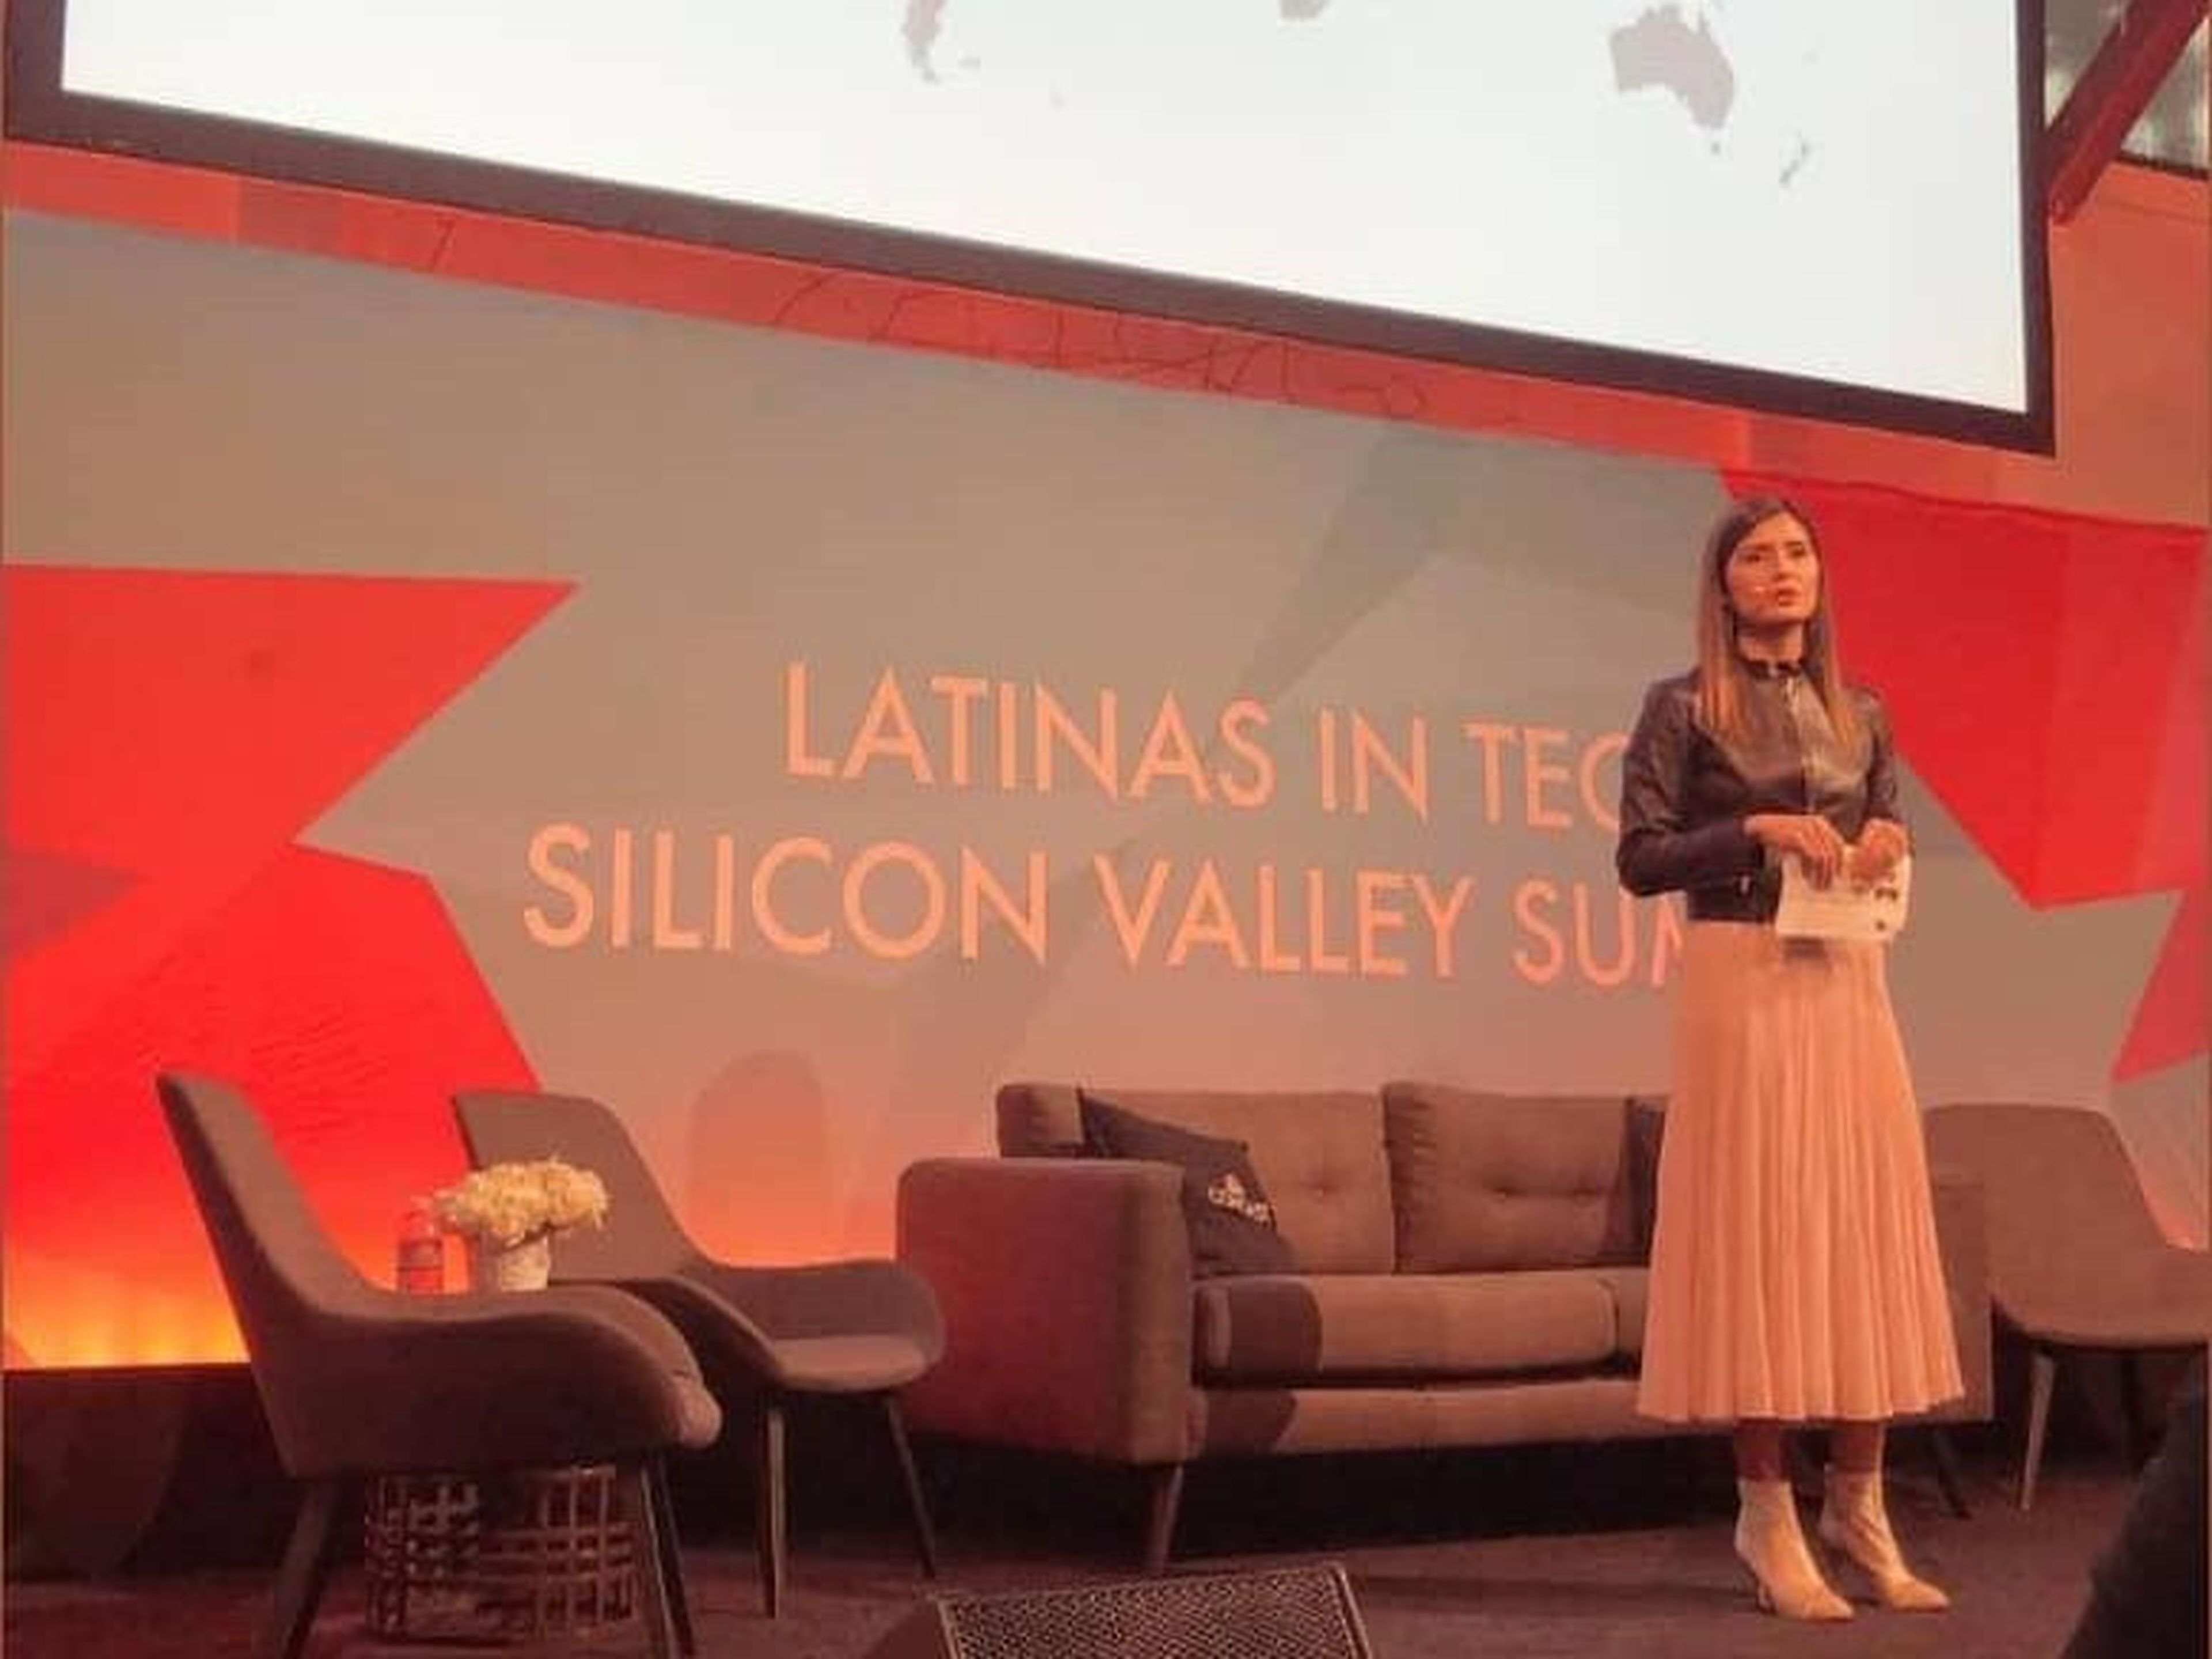 About once per quarter, Rincon goes to events like the Latina in Tech summit she attended in San Francisco in November, where she talked about growing up in Venezuela, Canada, Indonesia, and the US and how it shaped the way she